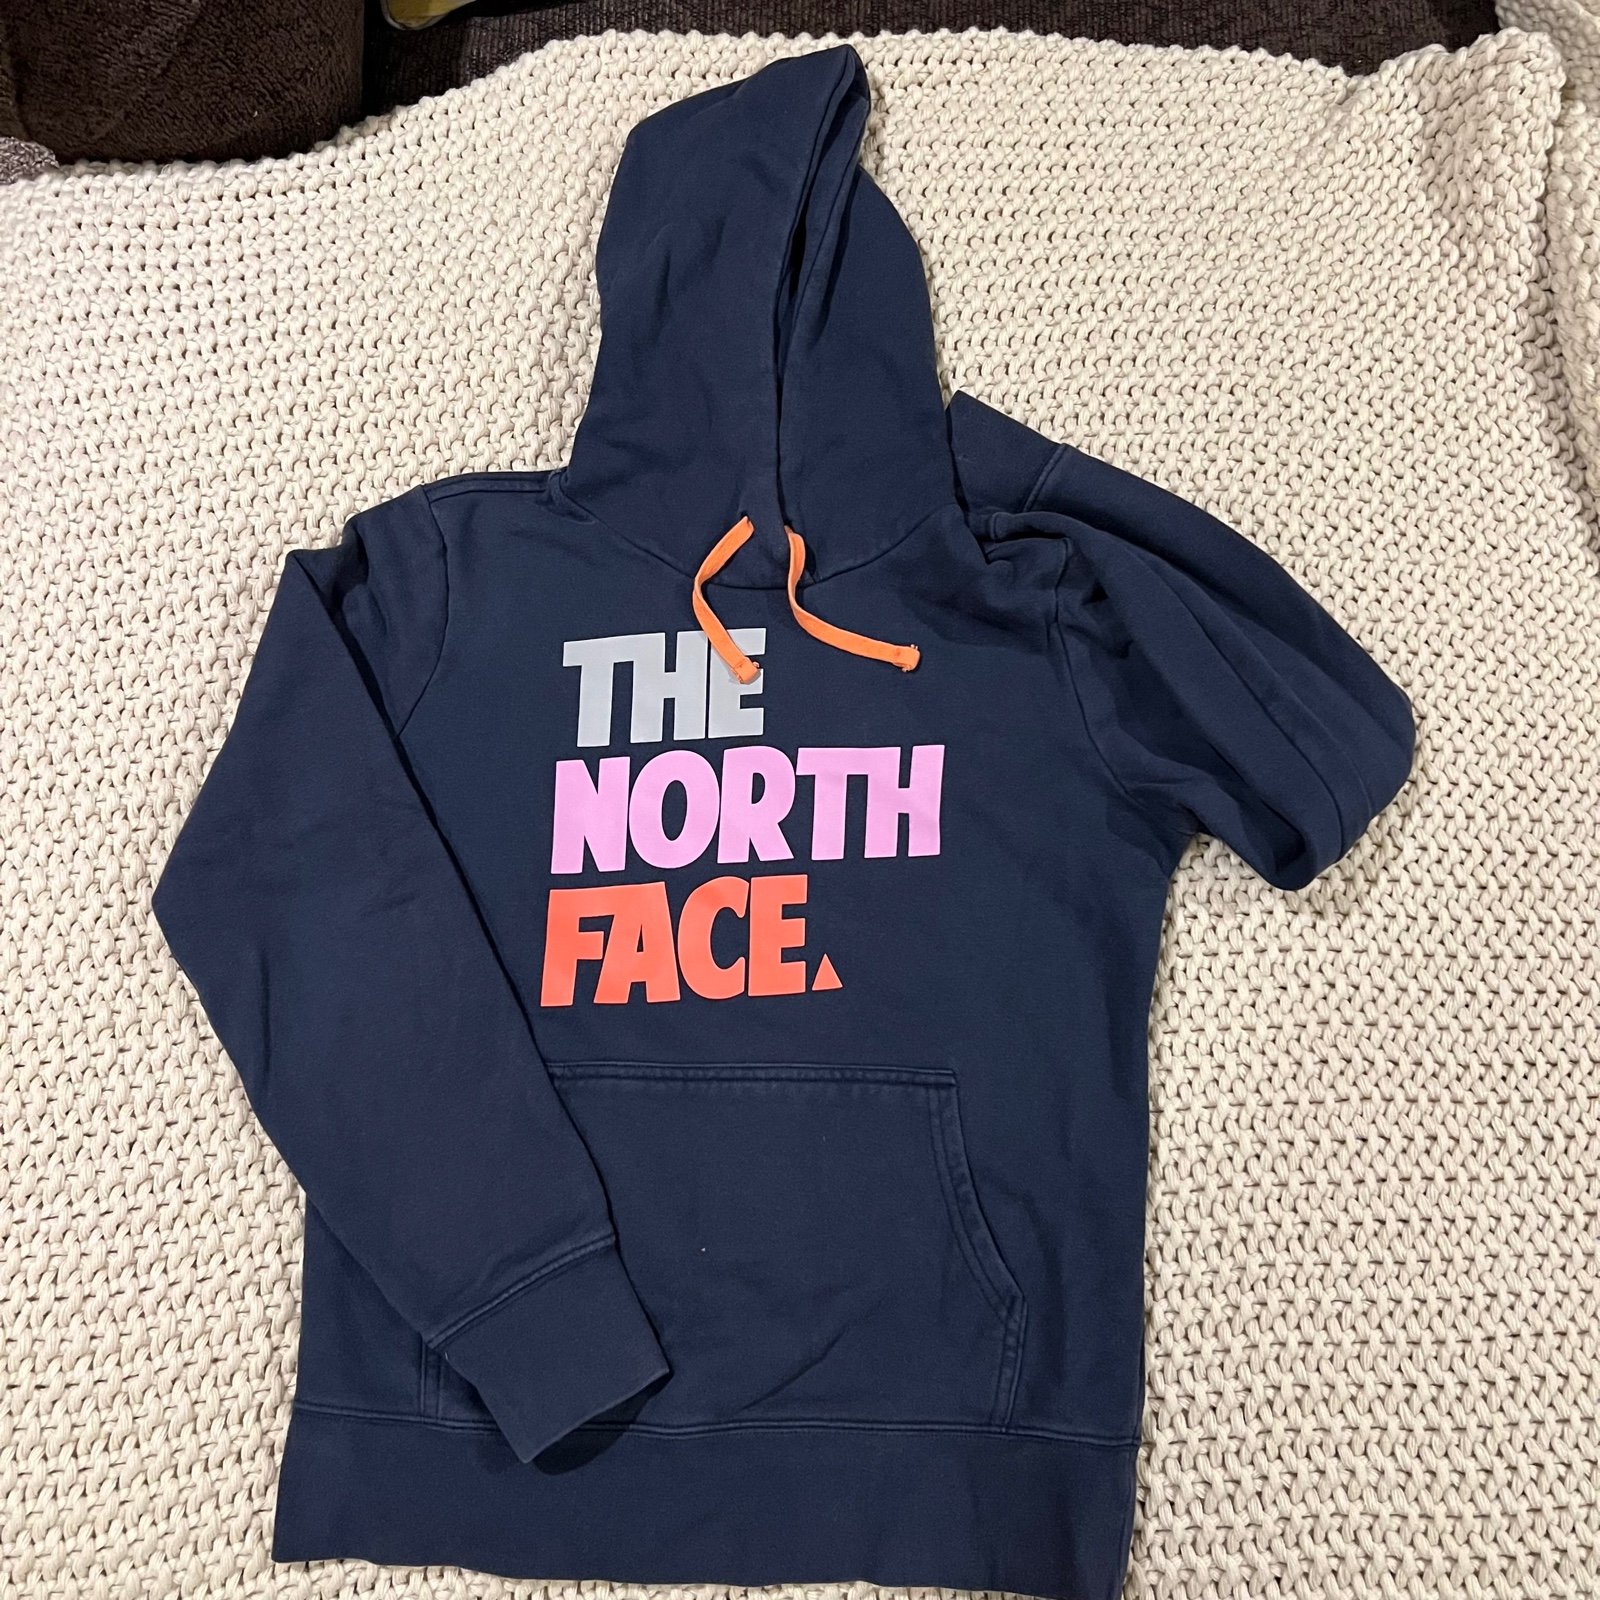 good price The north face hoodie | small je2Iucm4p High